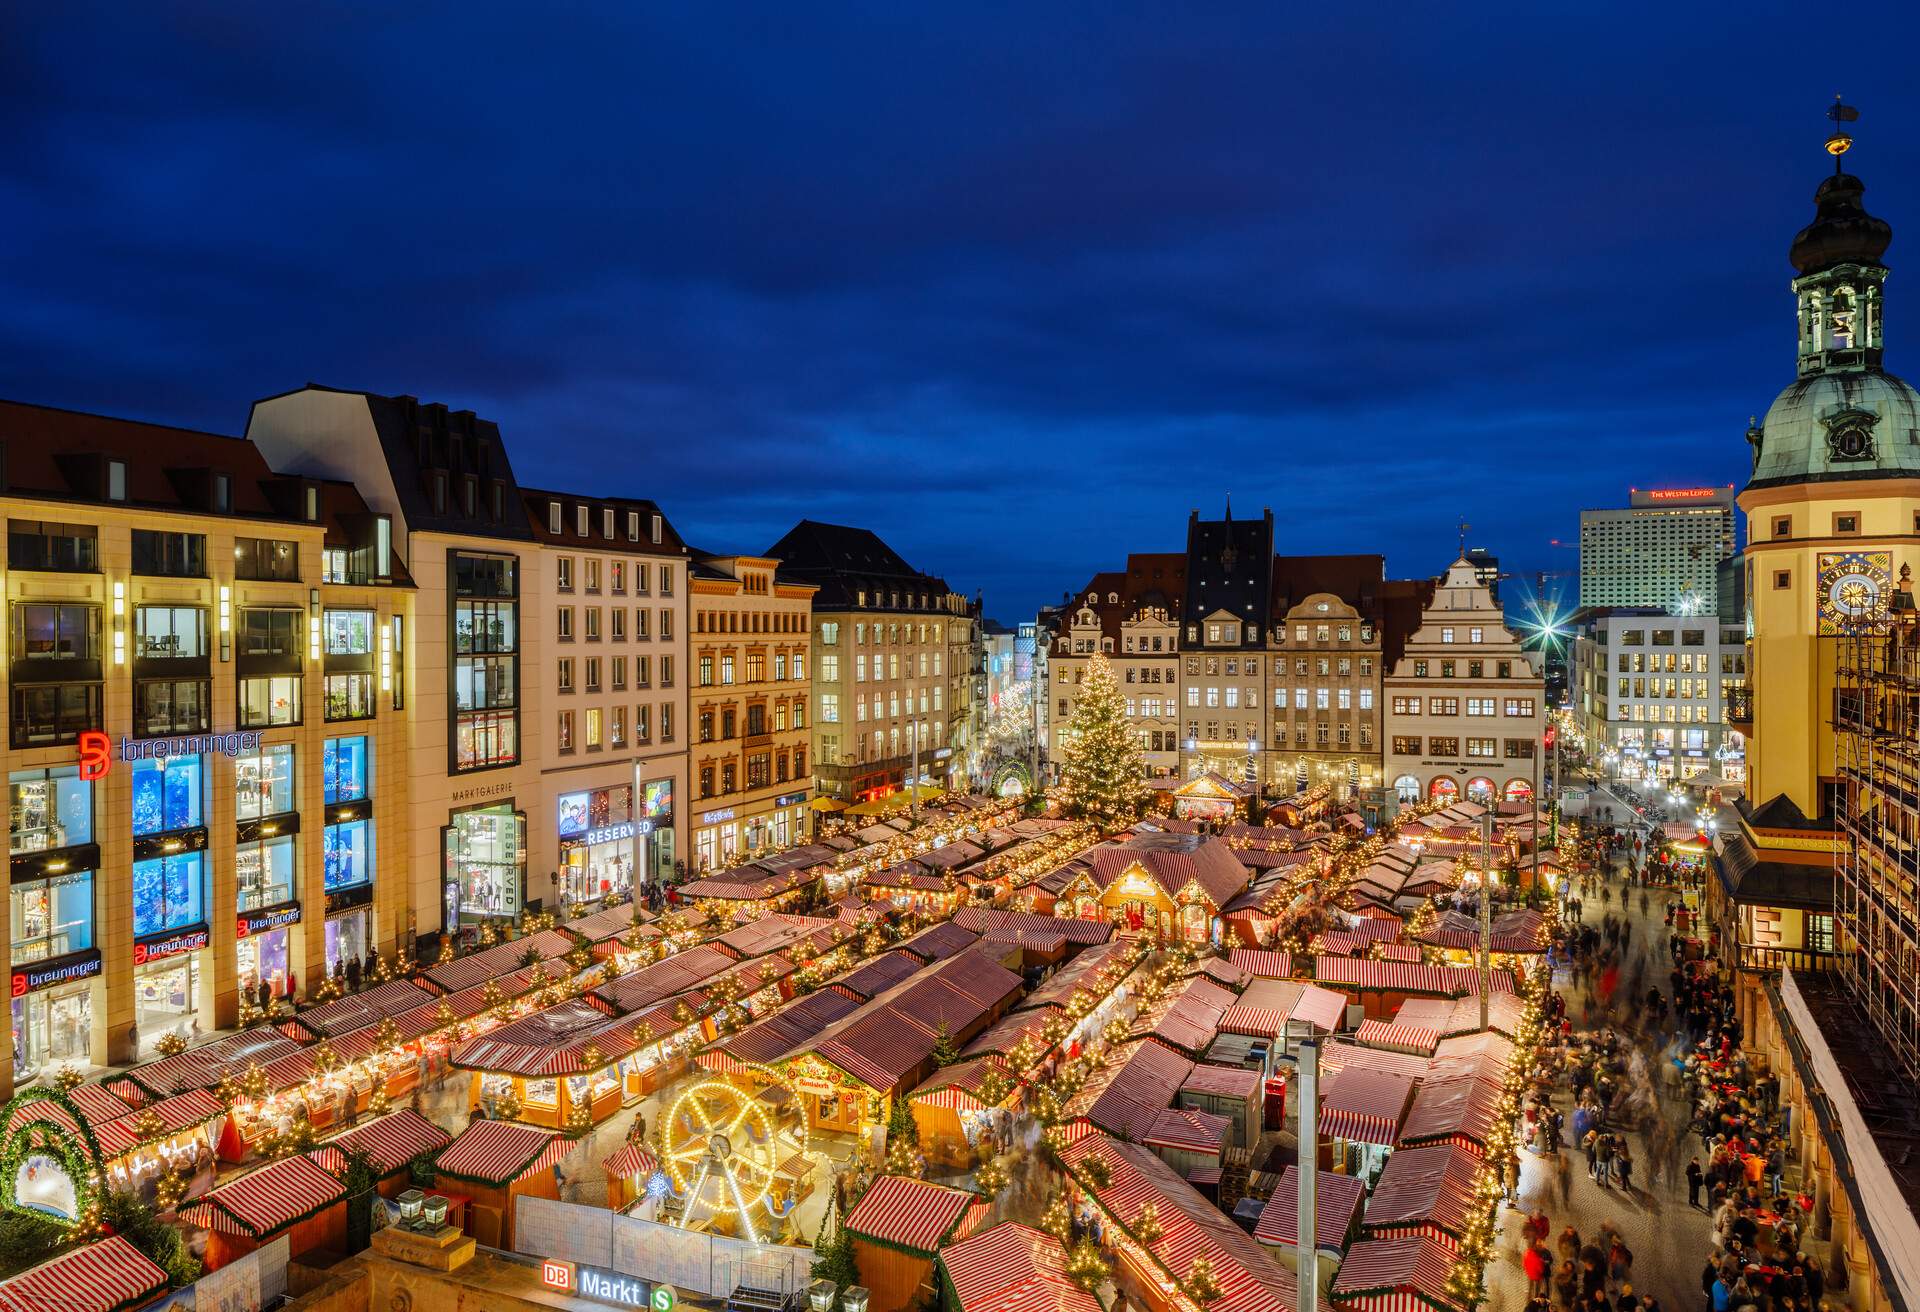 DEST_GERMANY_LEIPZIG_CHRISTMAS-MARKET_GettyImages-1090584832